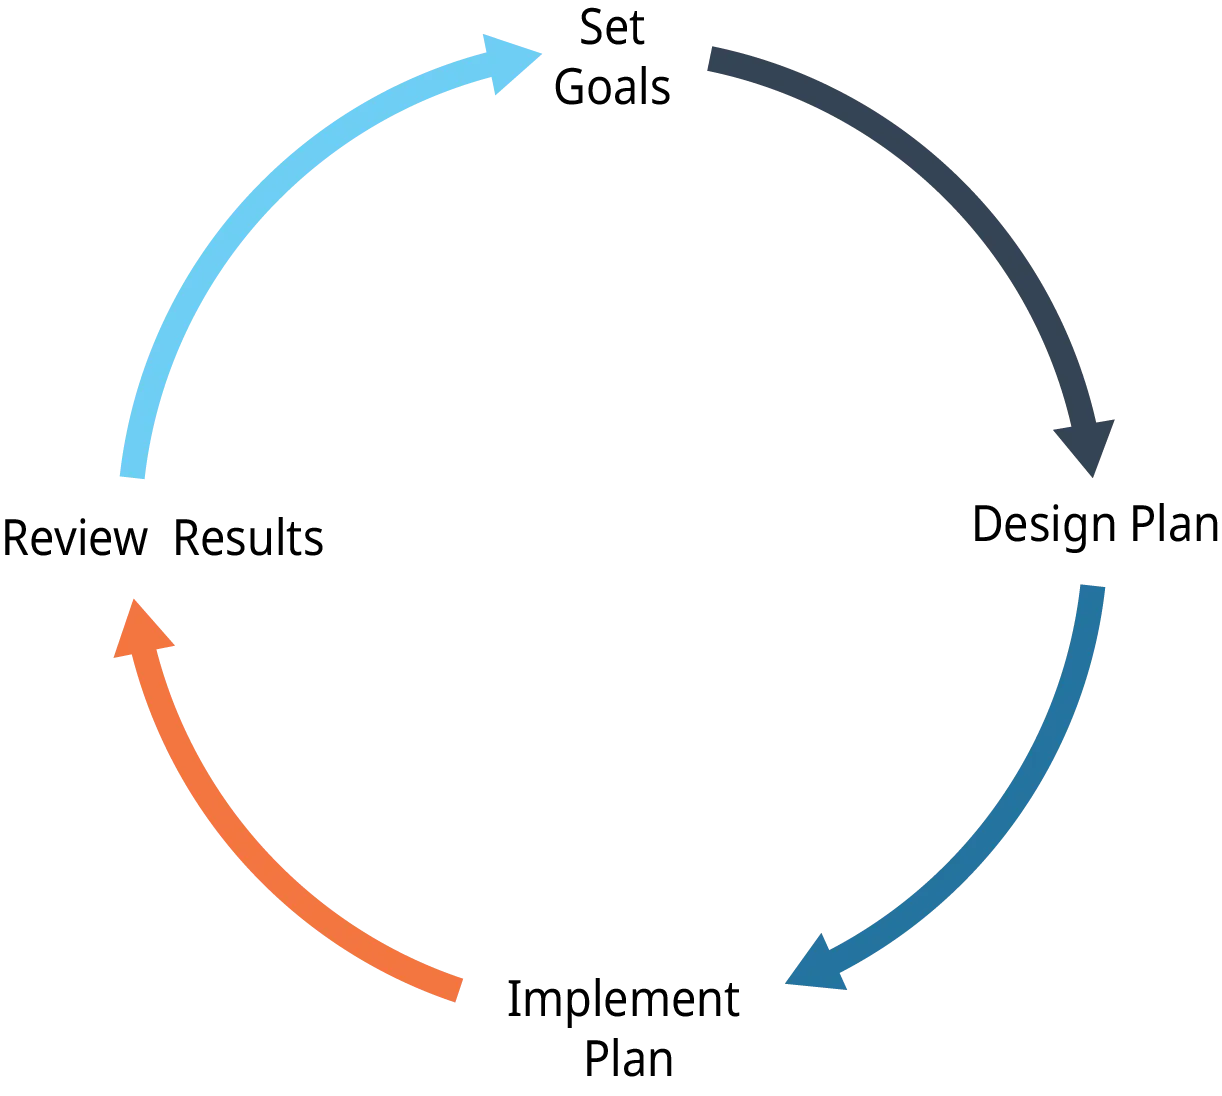 A diagram shows the four steps in the planning cycle moving in the clockwise direction. The steps are “Set Goals,” “Design Plan,” “Implement Plan,” and “Review Results.”